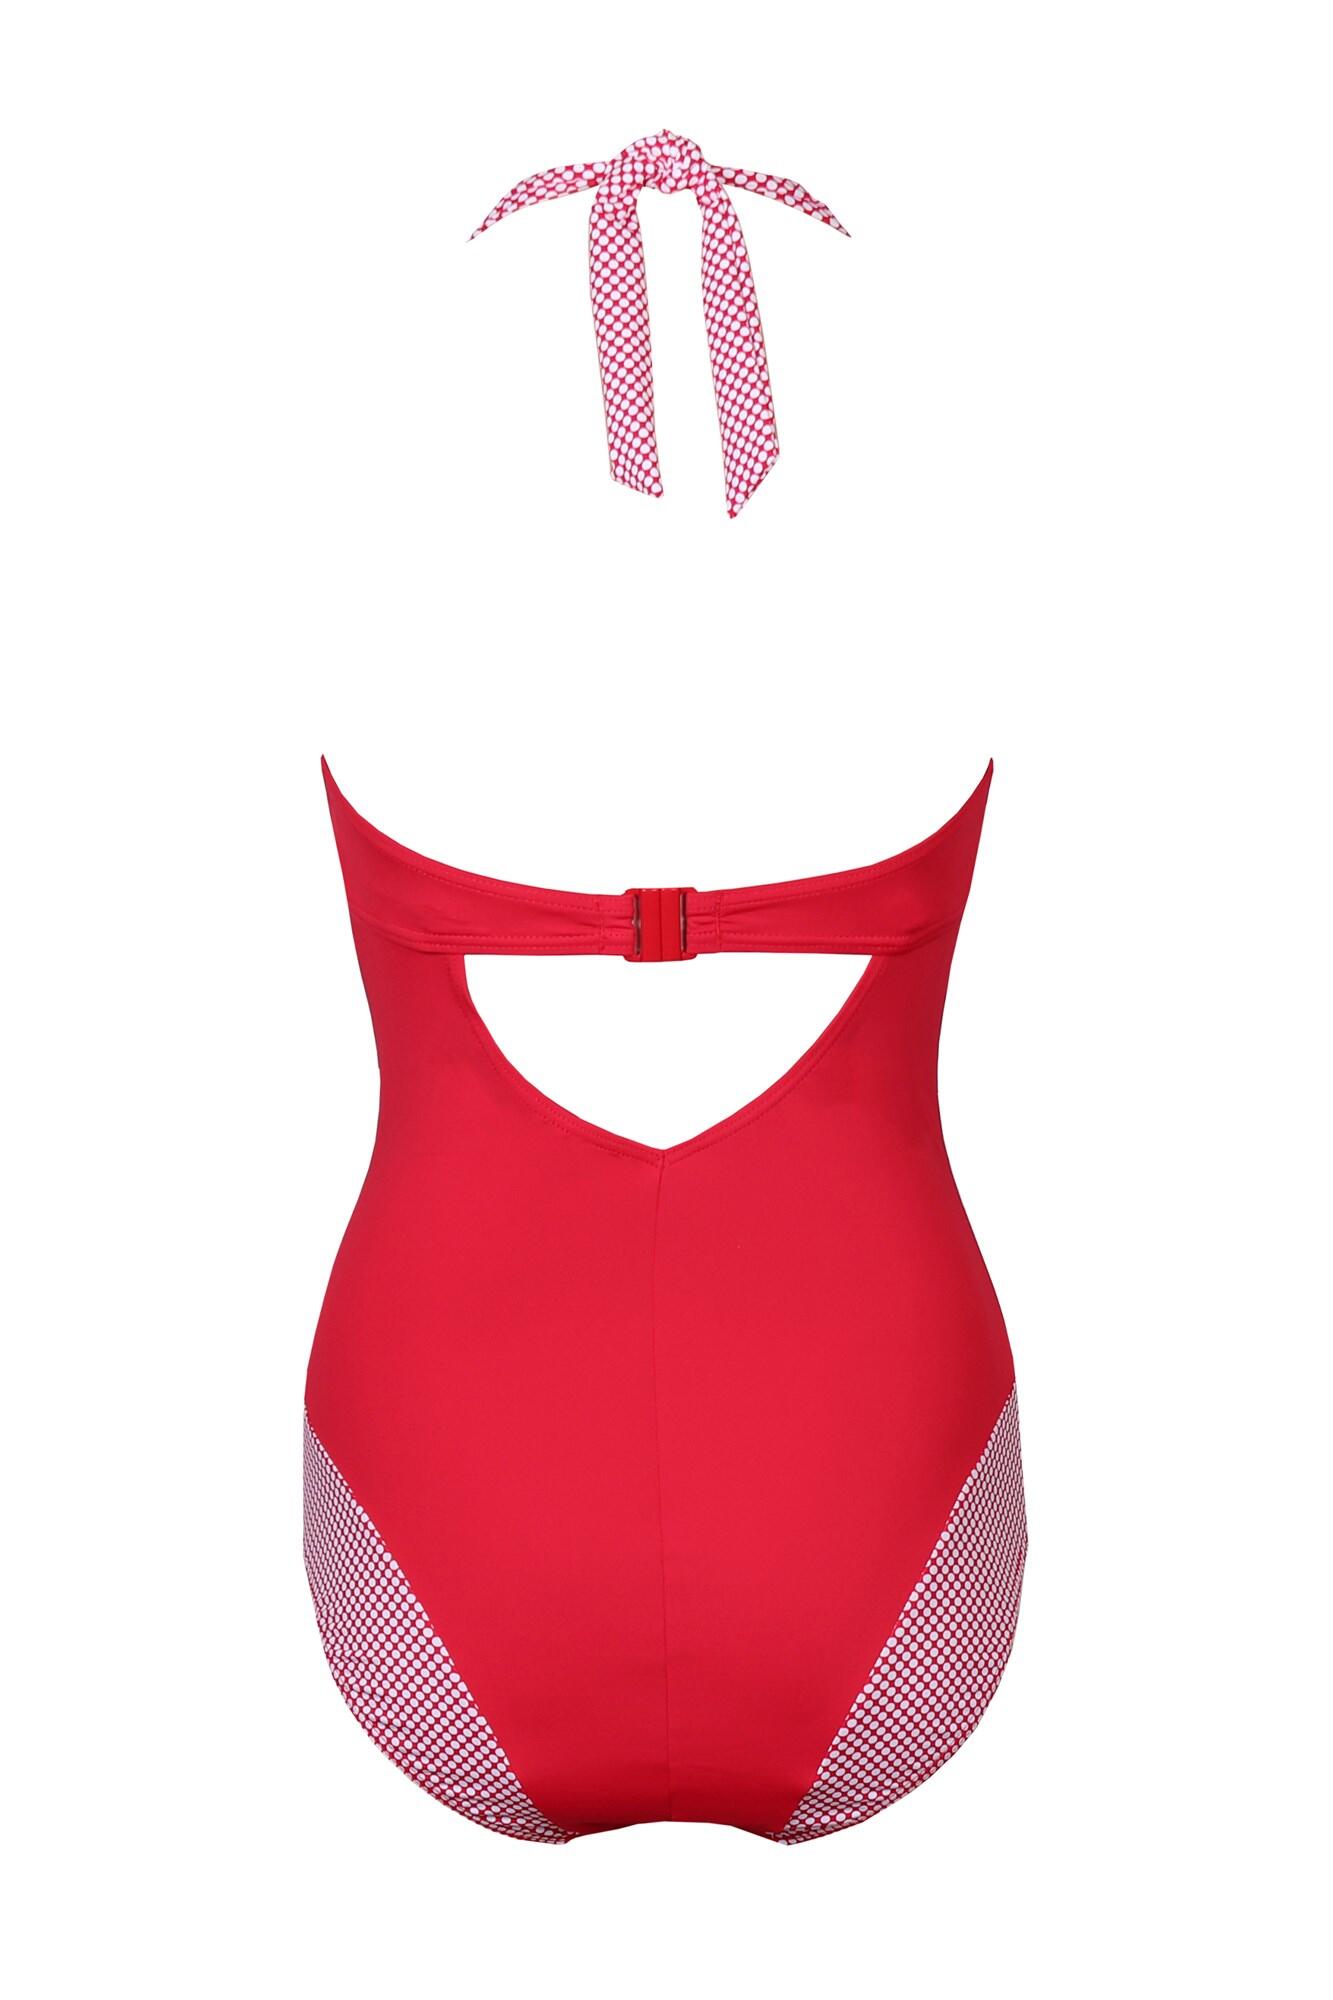 Positano Removable Cup Halter Control Swimsuit